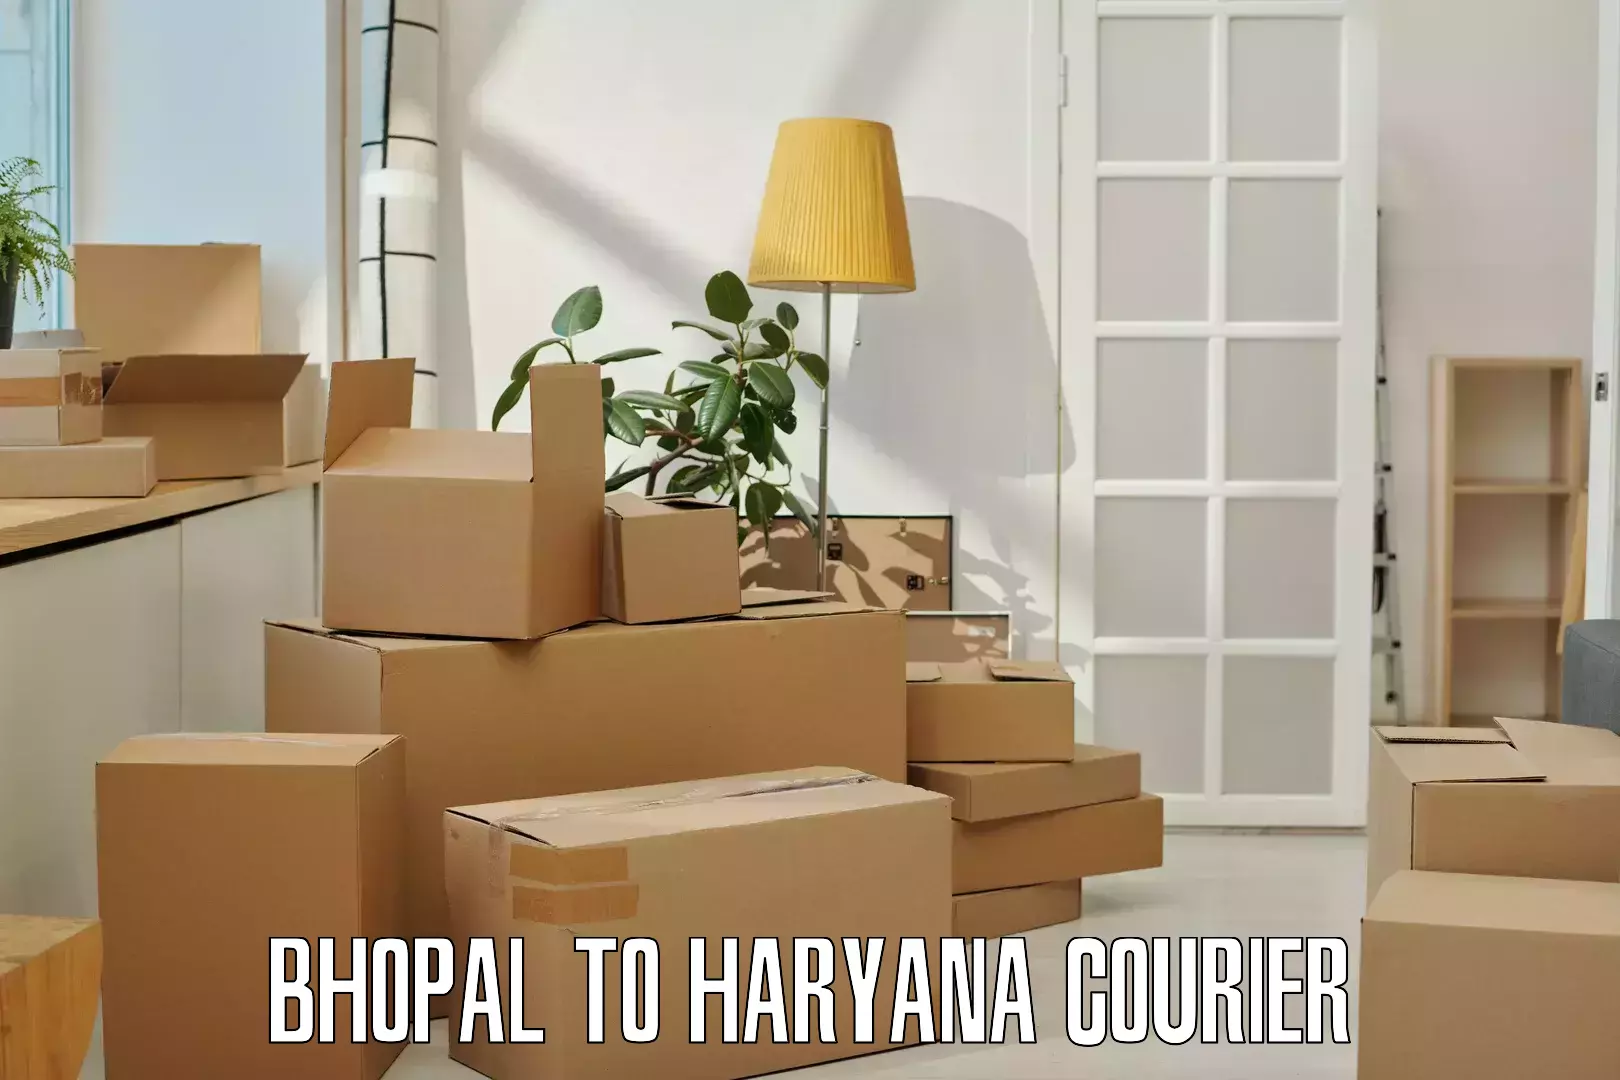 Express mail service Bhopal to Sonipat